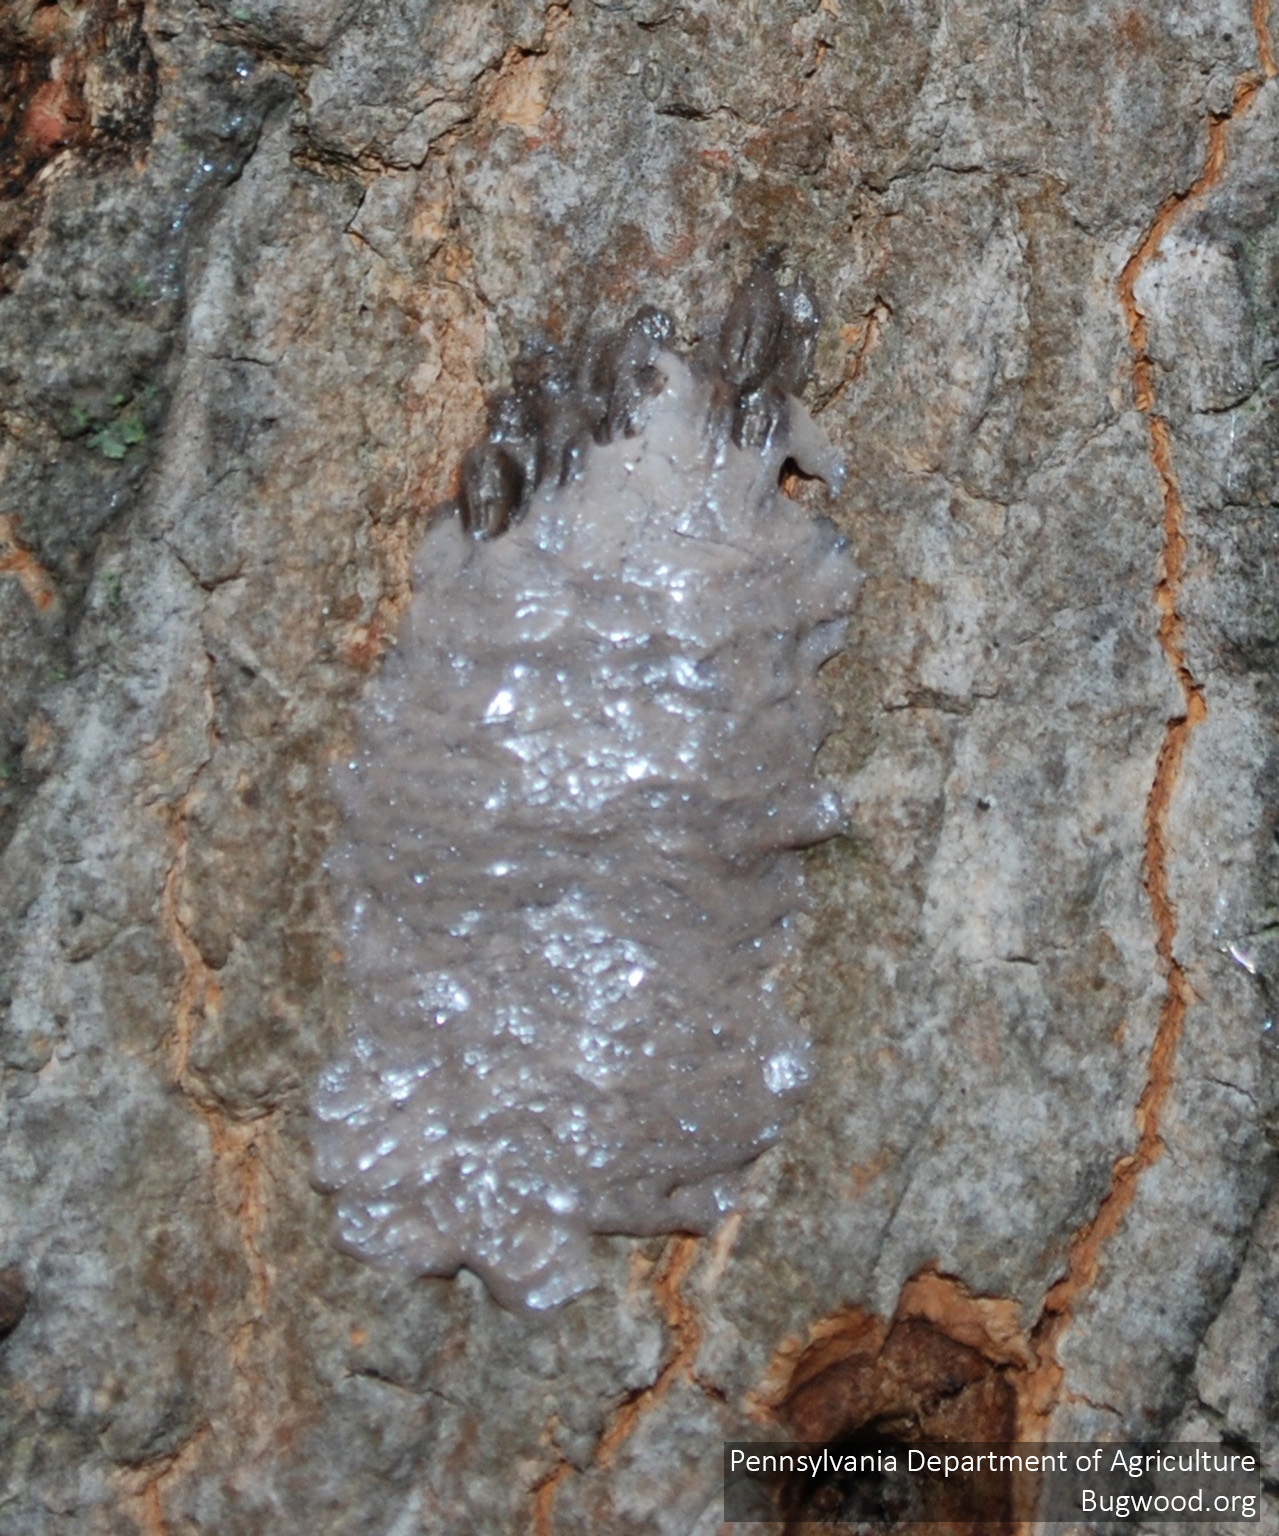 Egg masses from spotted lanternfly look like a mud smear.